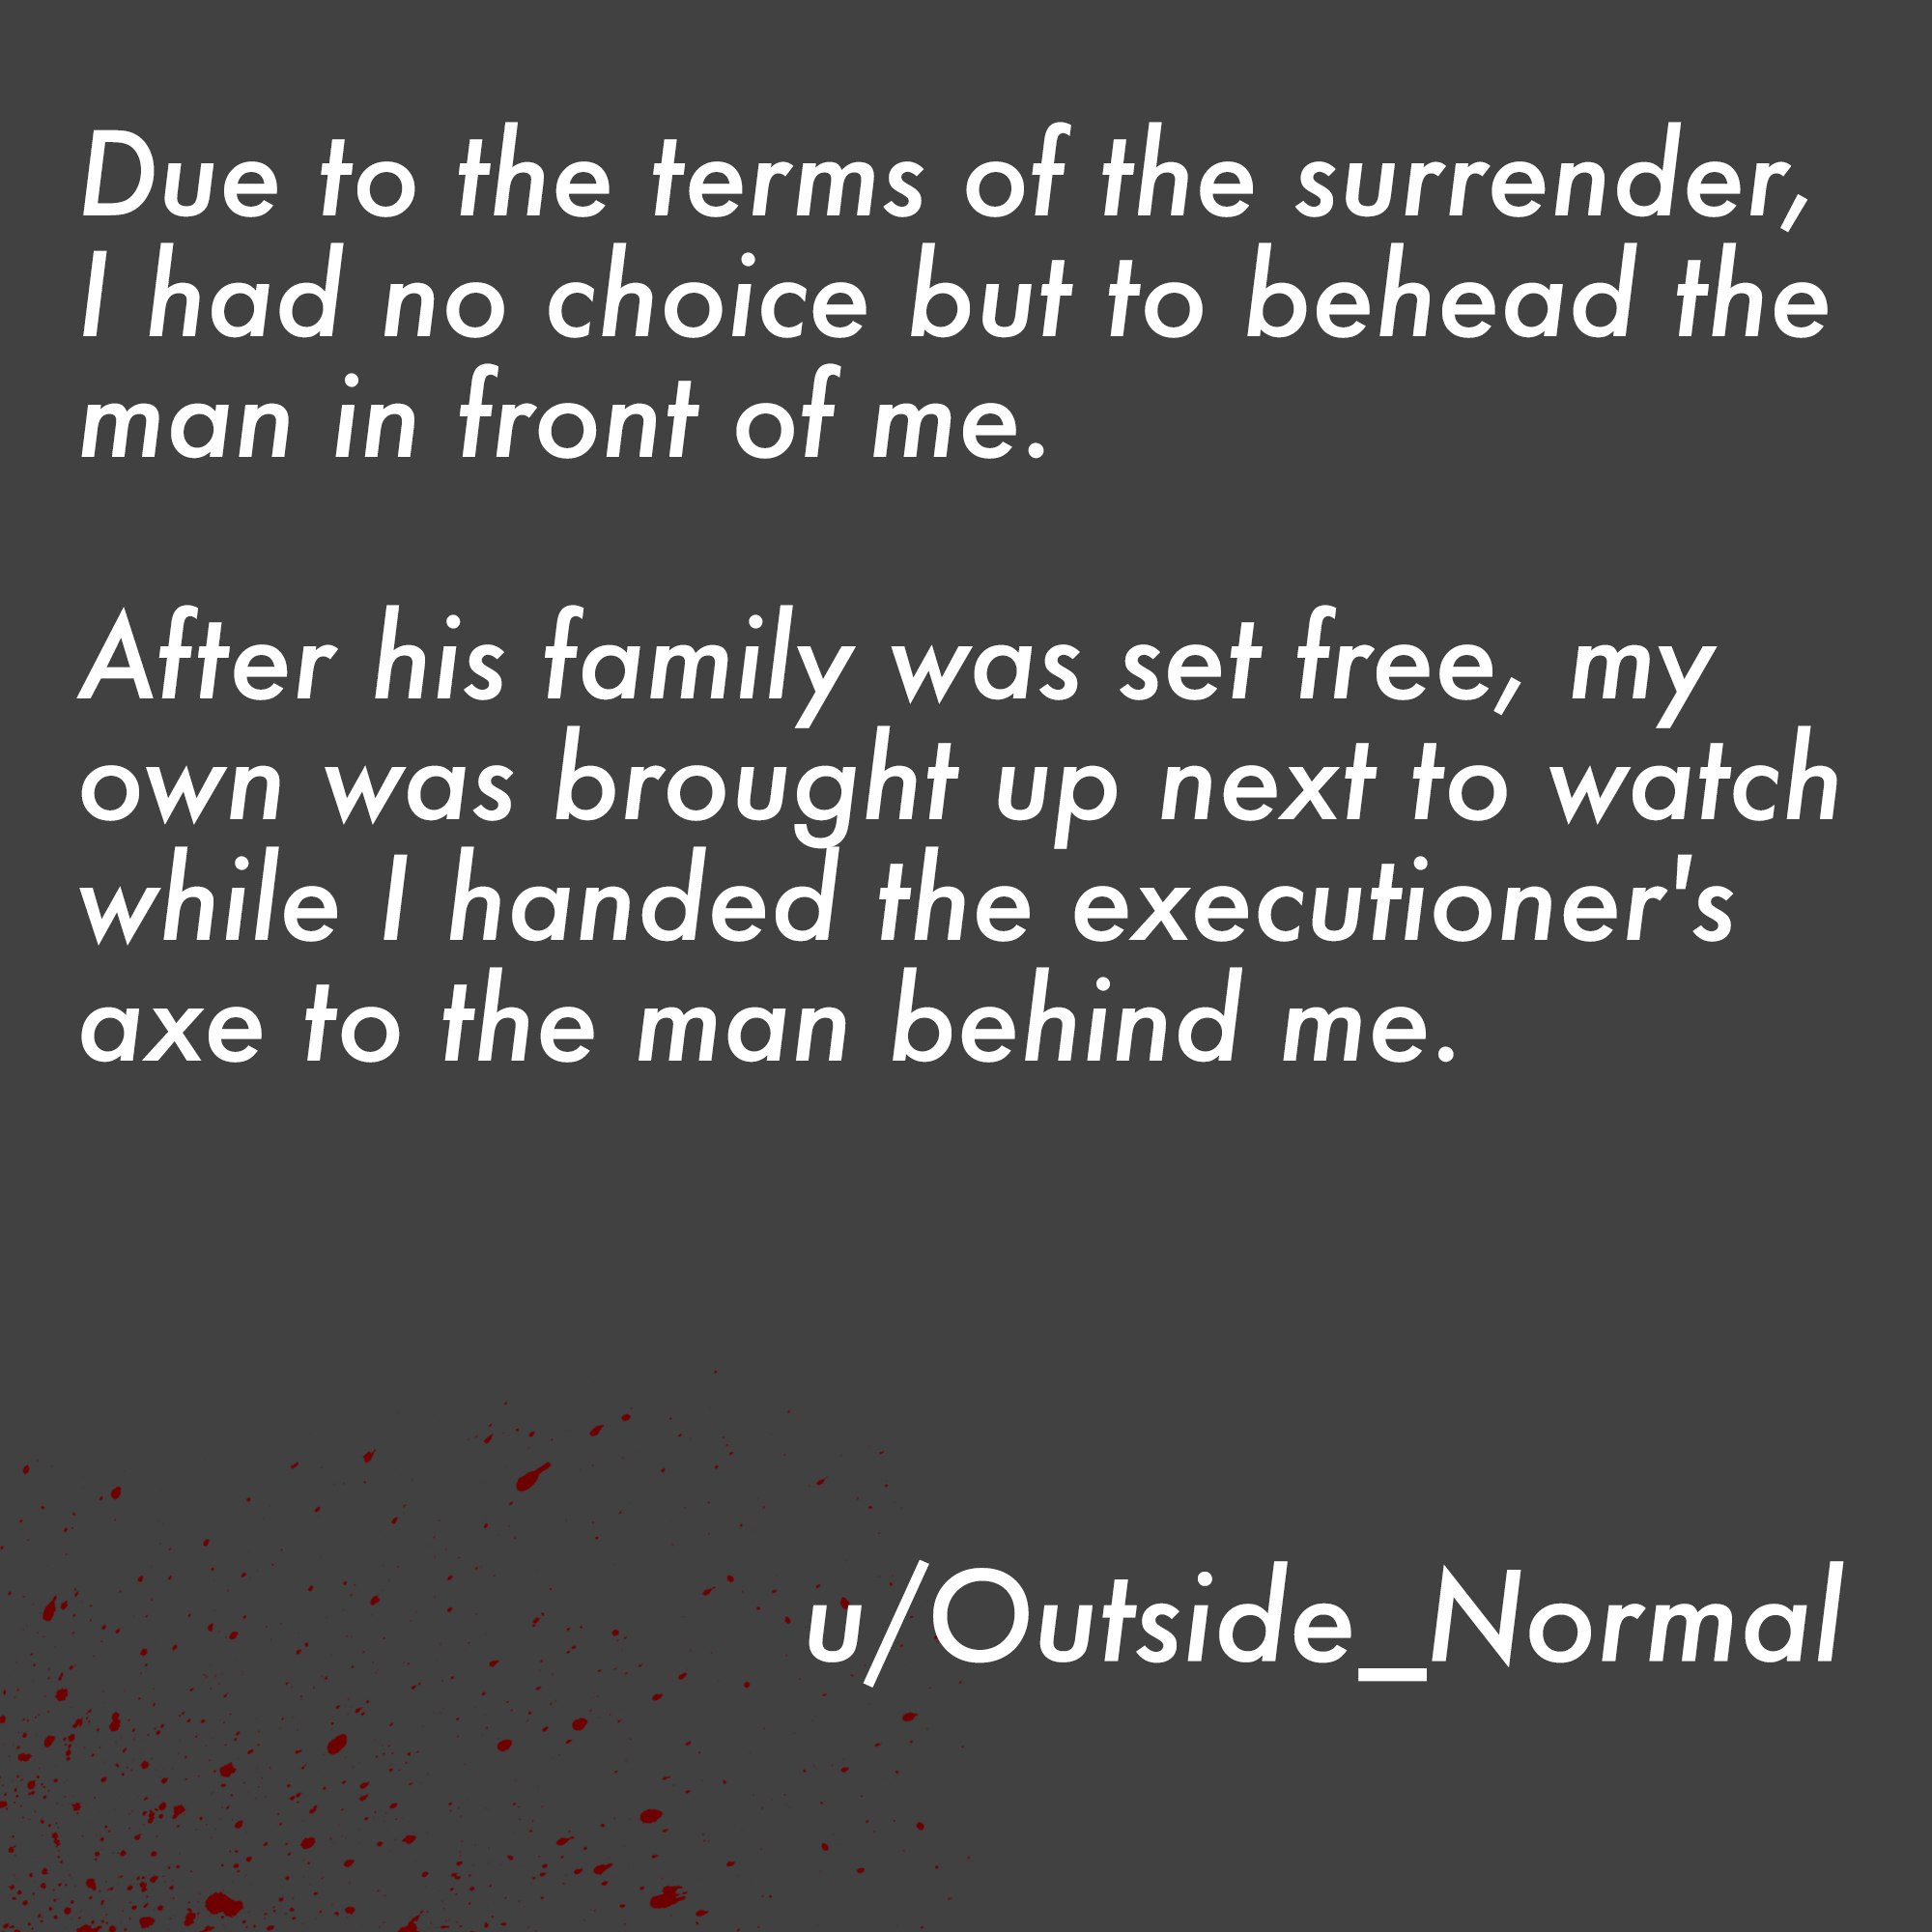 two line horror stories - angle - Due to the terms of the surrender, I had no choice but to behead the man in front of me. After his family was set free, my own was brought up next to watch while I handed the executioner's axe to the man behind me. uOutsi